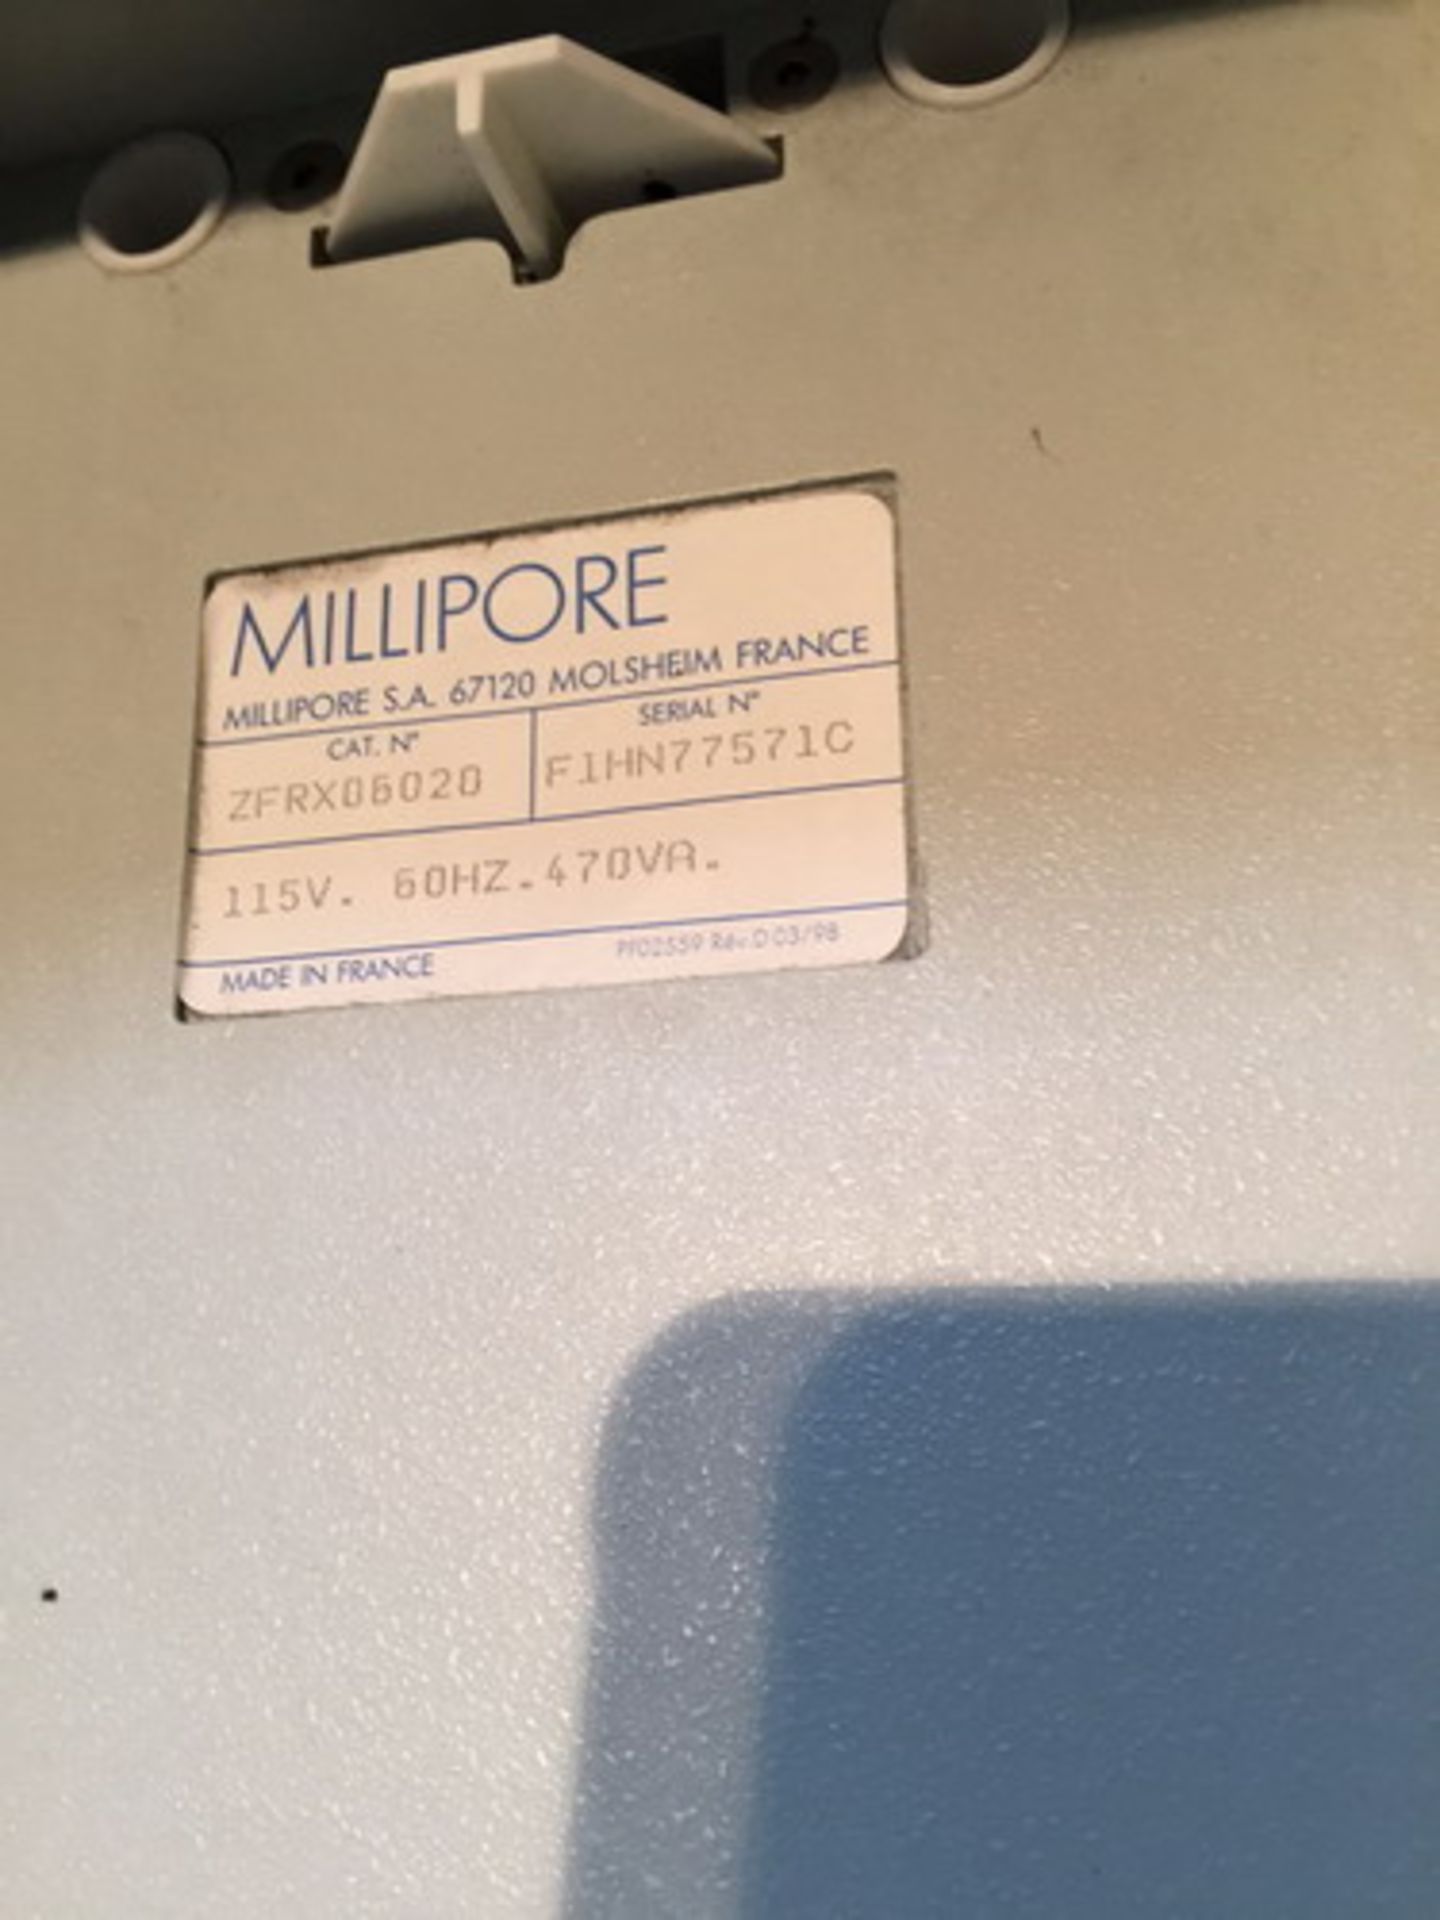 1-Millipore Water Purification System, Model Milli-RX20, SN F1HN77571C - Image 3 of 3